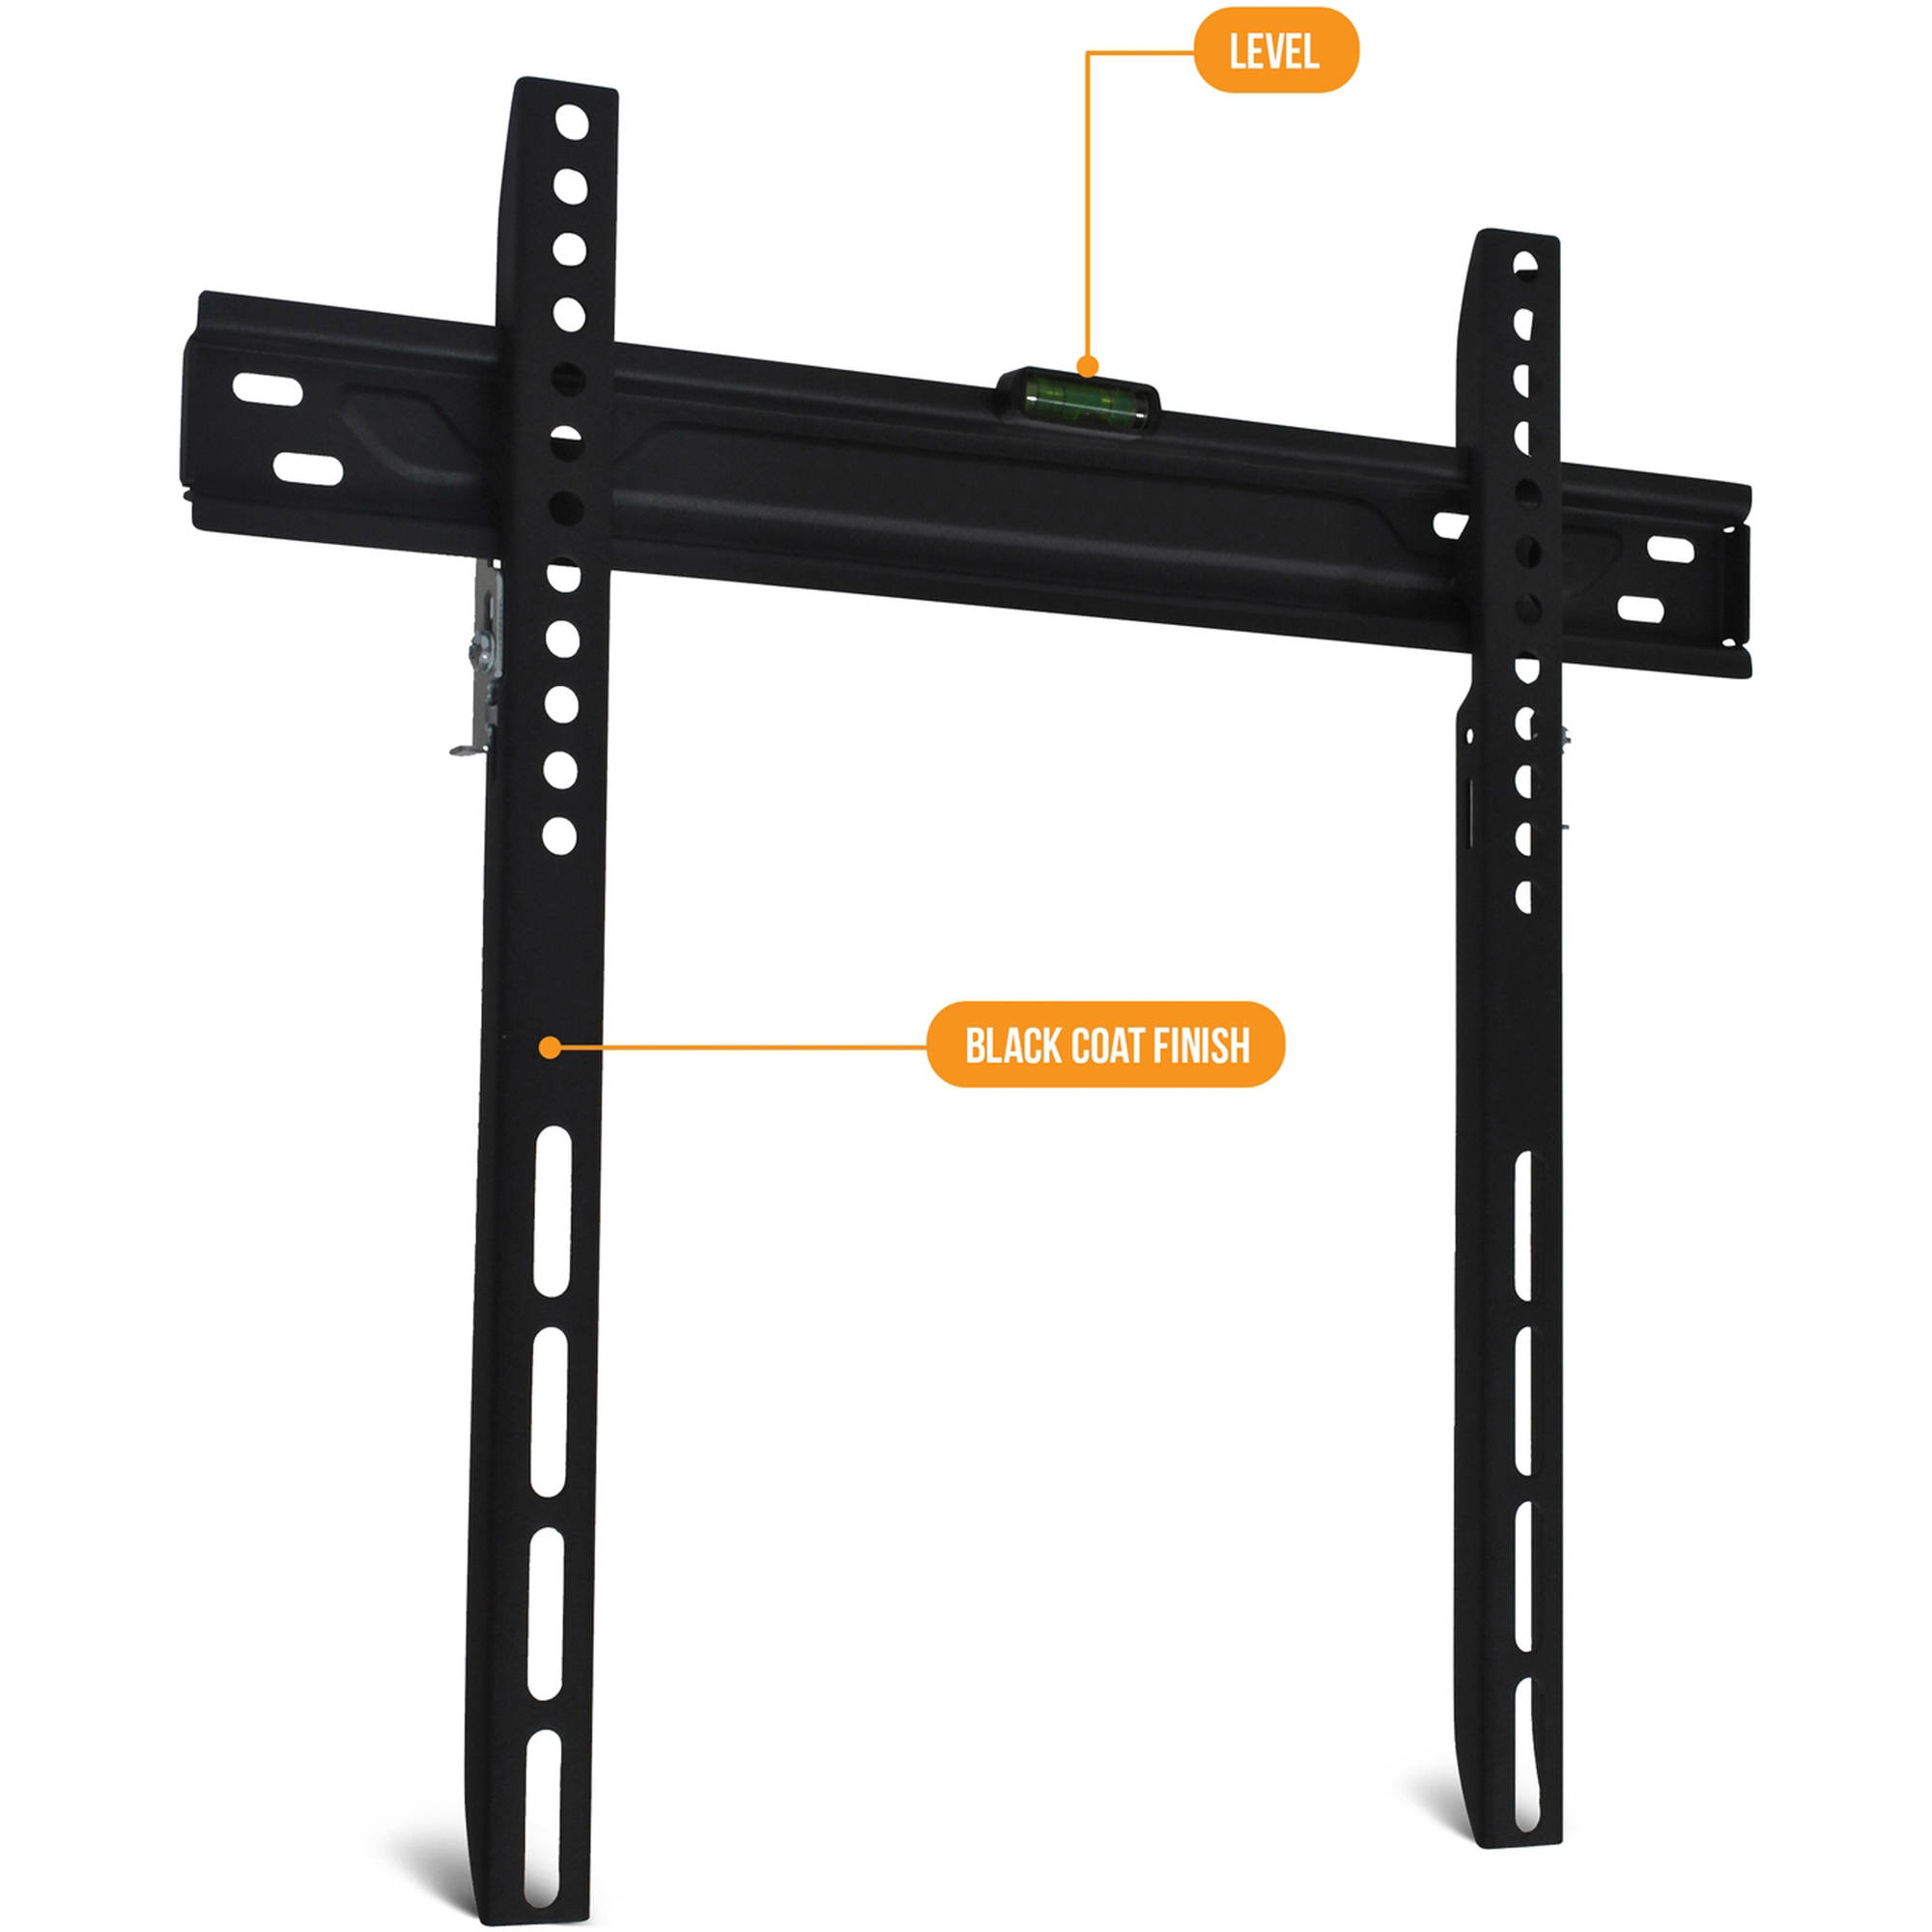 Low-Profile TV Wall Mount for 19"-60" TVs with HDMI Cable, UL Certified - image 4 of 8